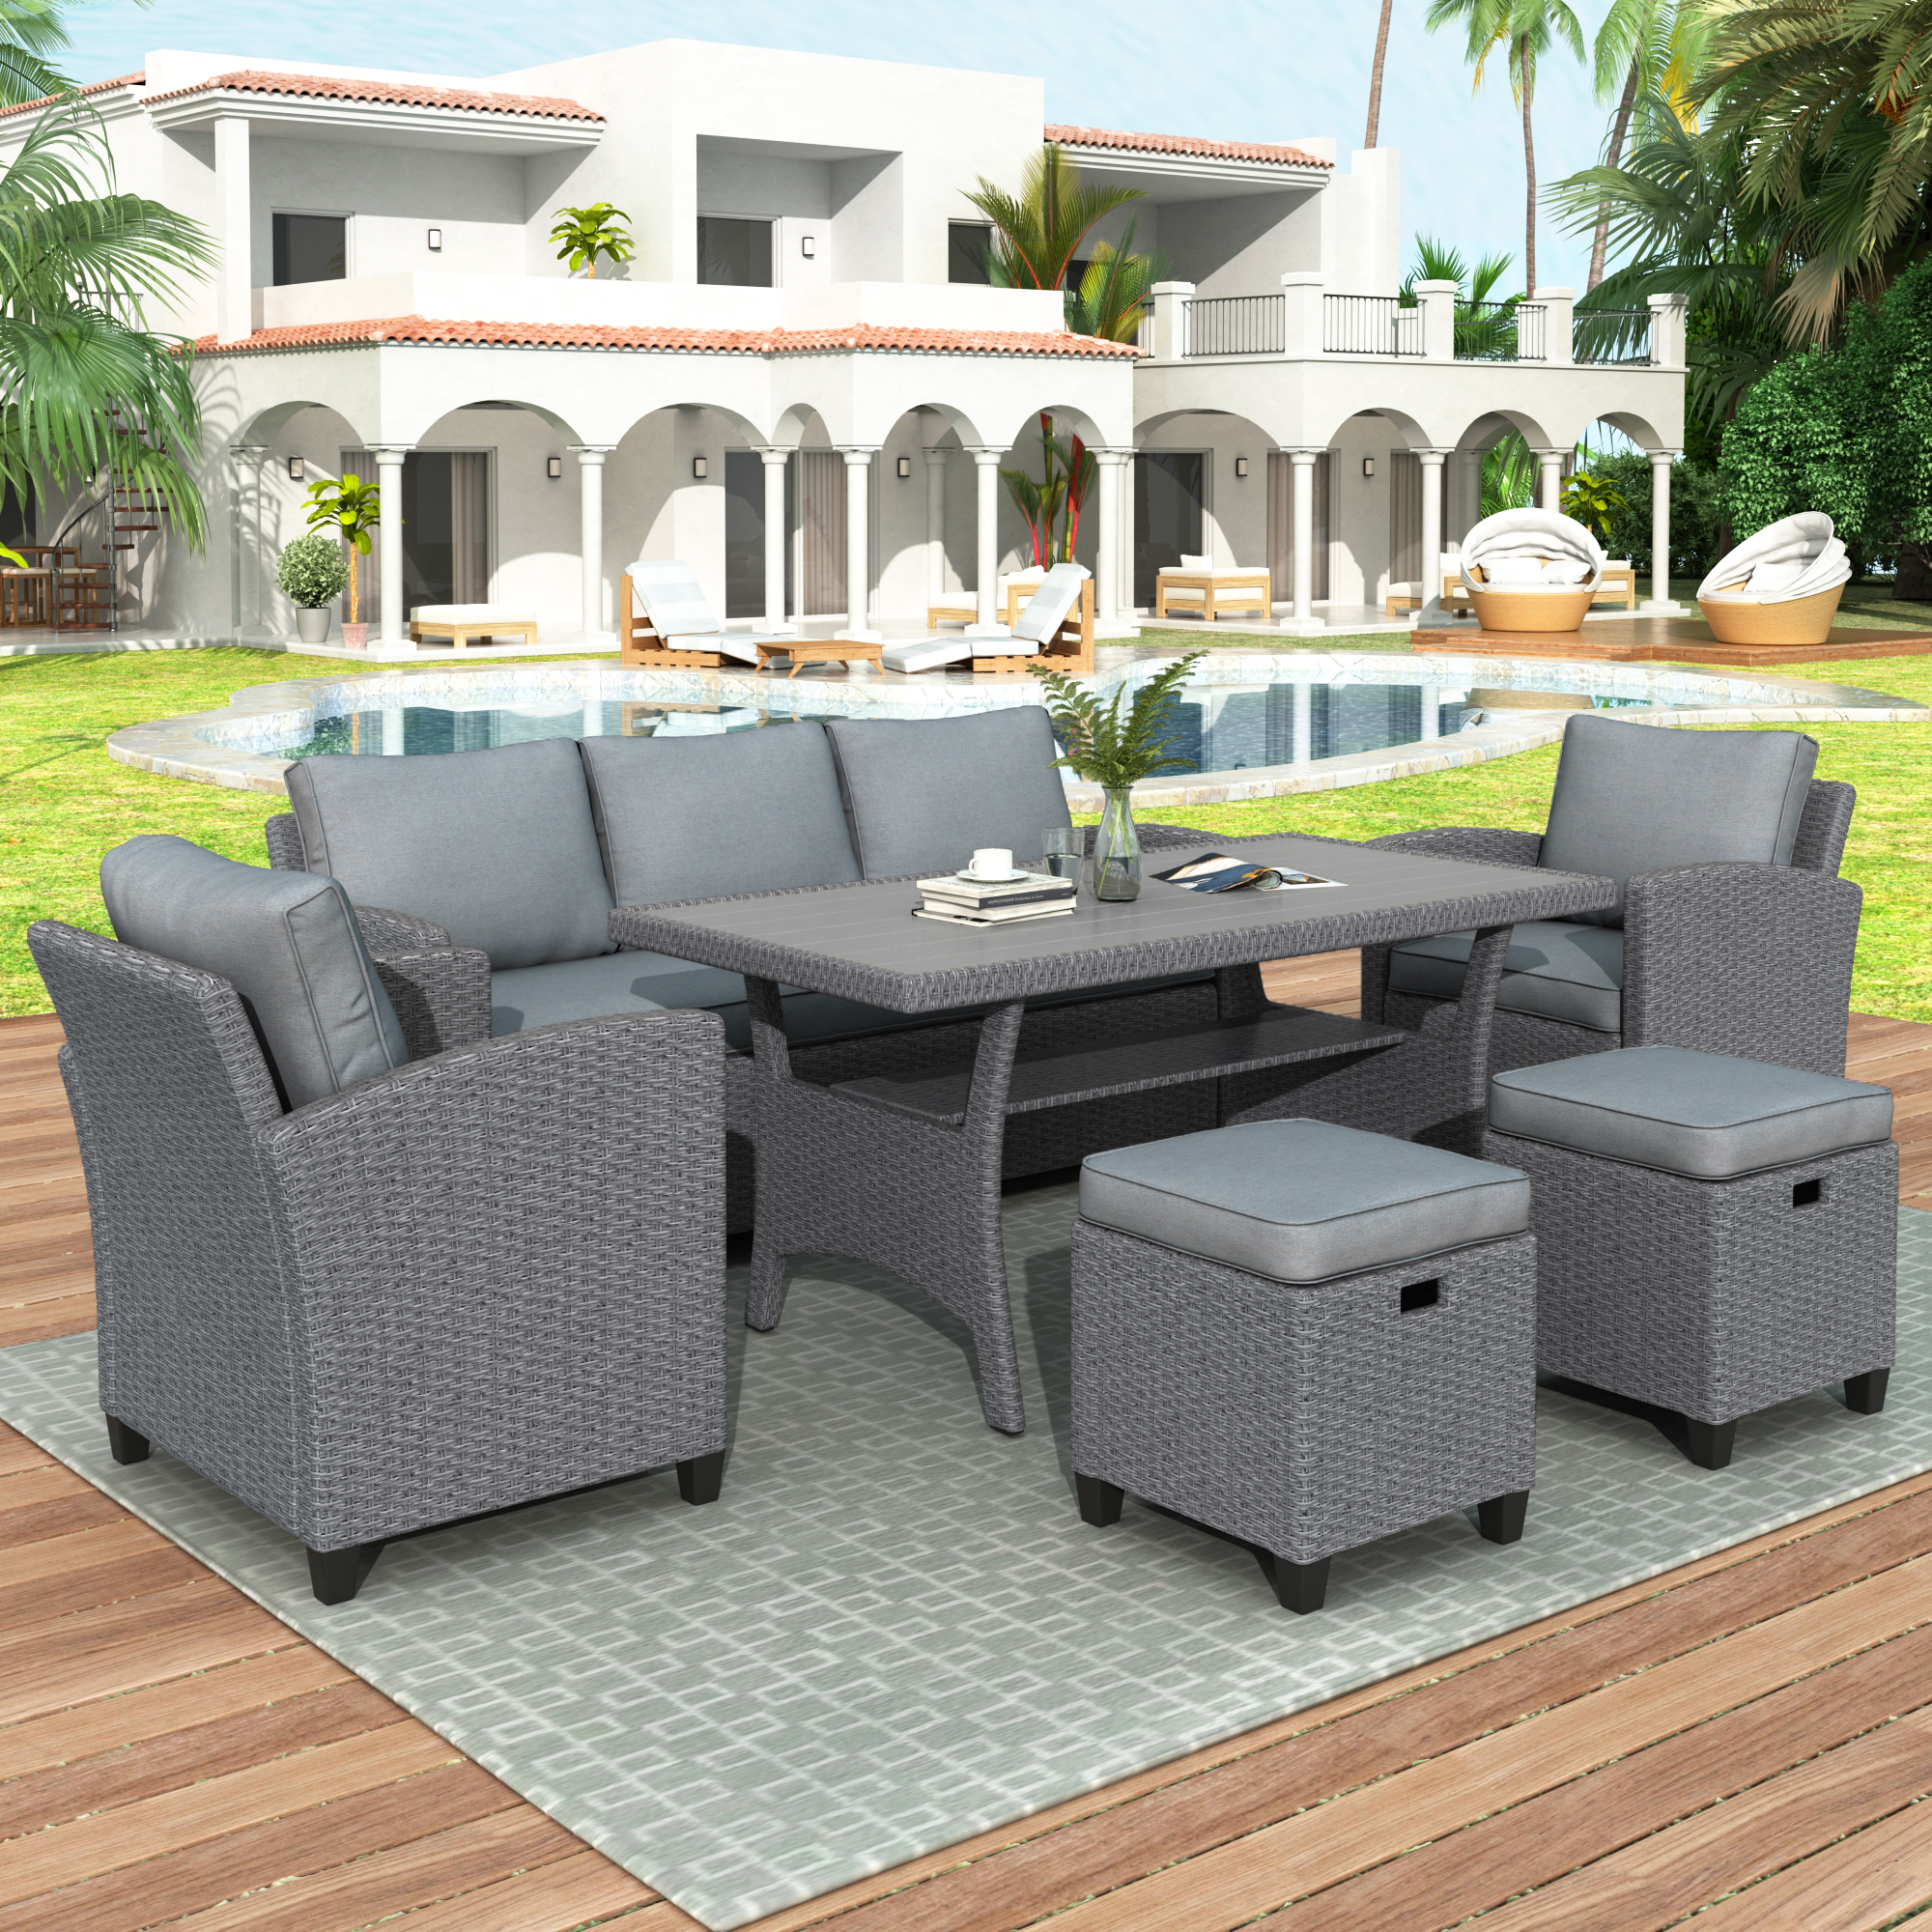 6 Pieces Outdoor Dining Sets, Sectional Sofa Patio Dining Table and Chairs Set, PE Rattan Conversation Set, Gray Wicker Garden Backyard Sectional Sofa - image 2 of 9